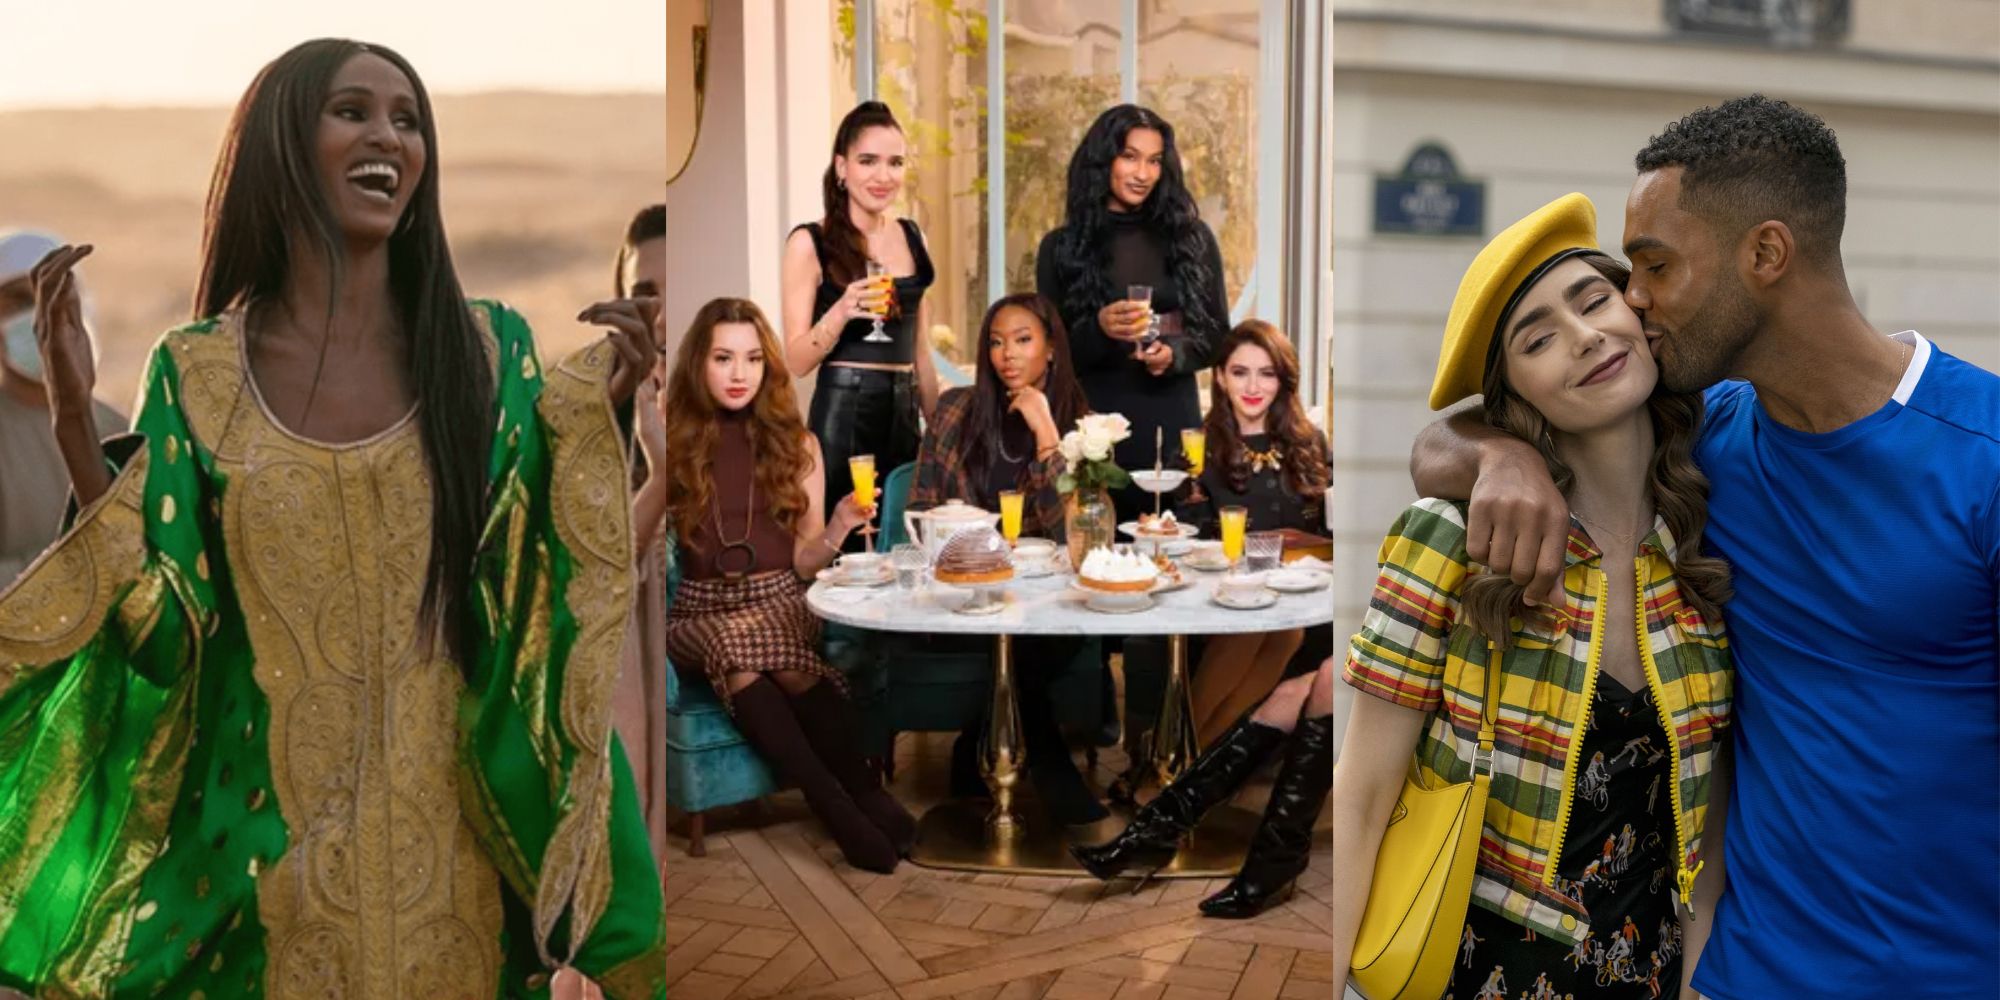 Split images of the Real Housewives of Dubai, Girlfriends in Paris, and Emily in Paris